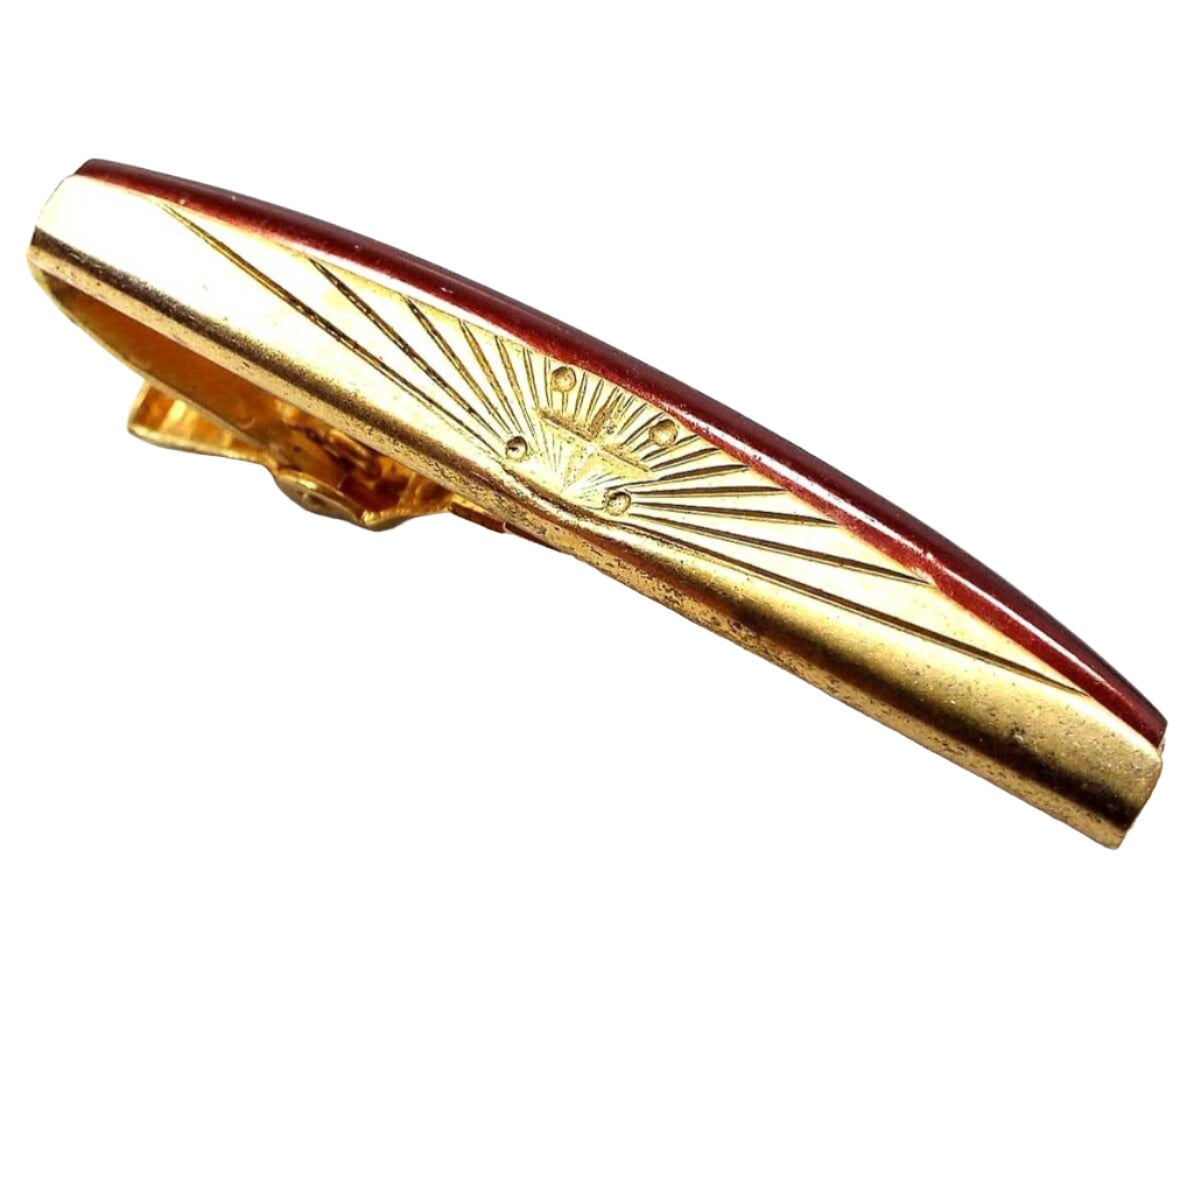 Modernist Style Gold Tone and Red Vintage Tie Clip Clasp